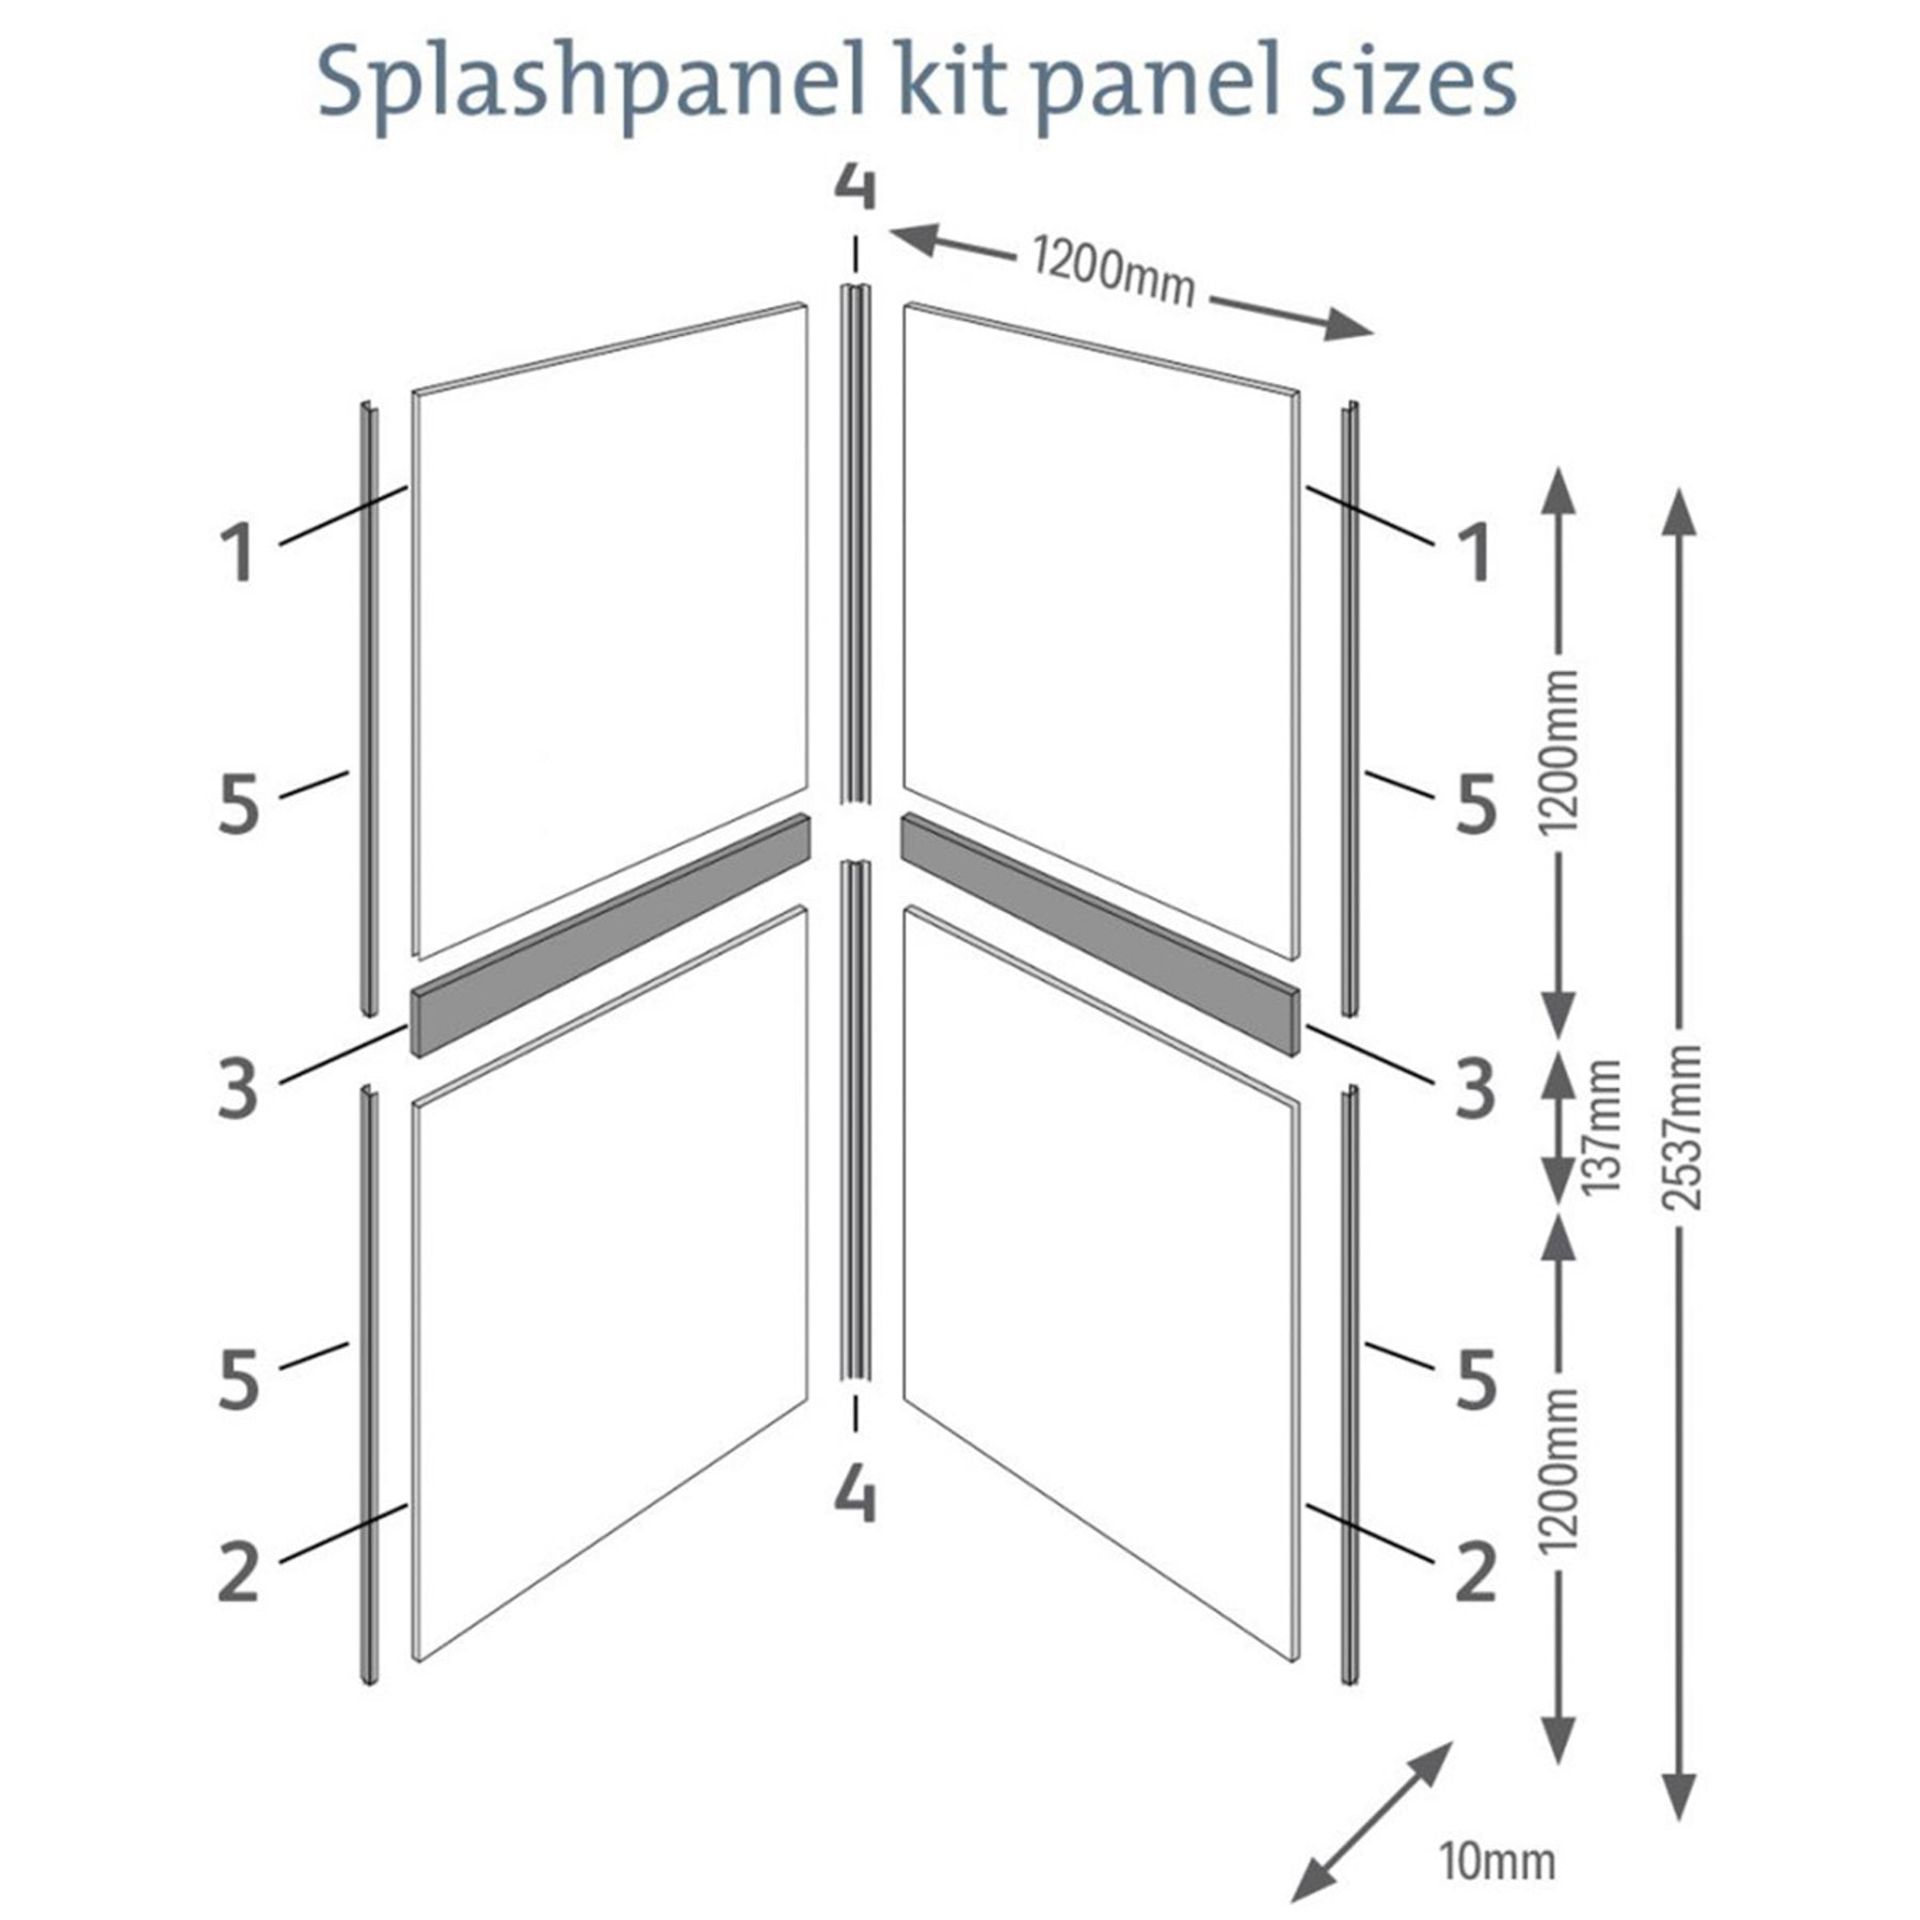 Splash Panel 2 sided shower wall kit in Artic Sparkle gloss, new and boxed, the kit contains 2 - Image 5 of 5